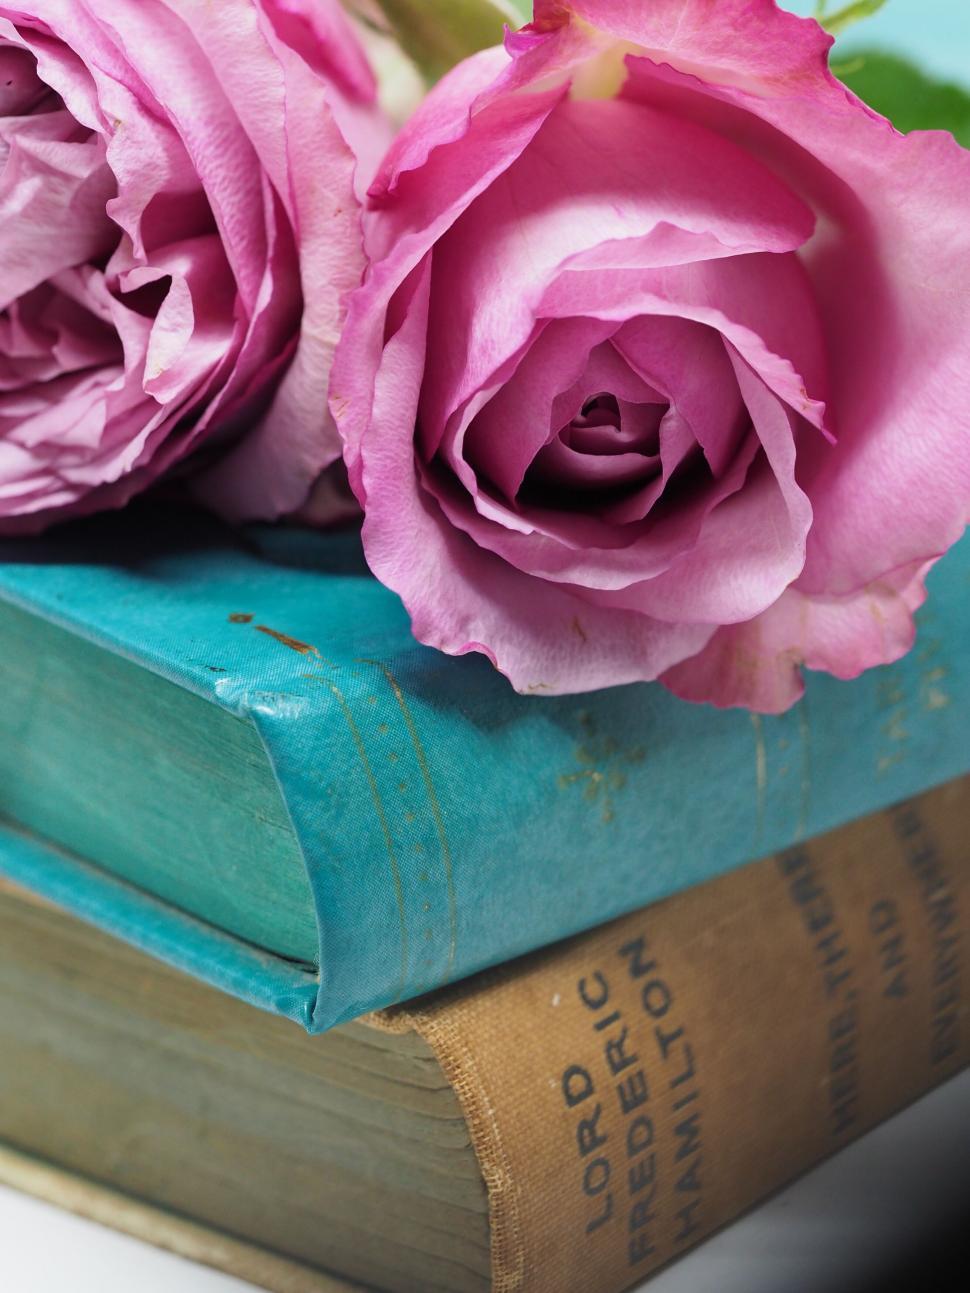 Free Image of Vintage books with pink roses on top 